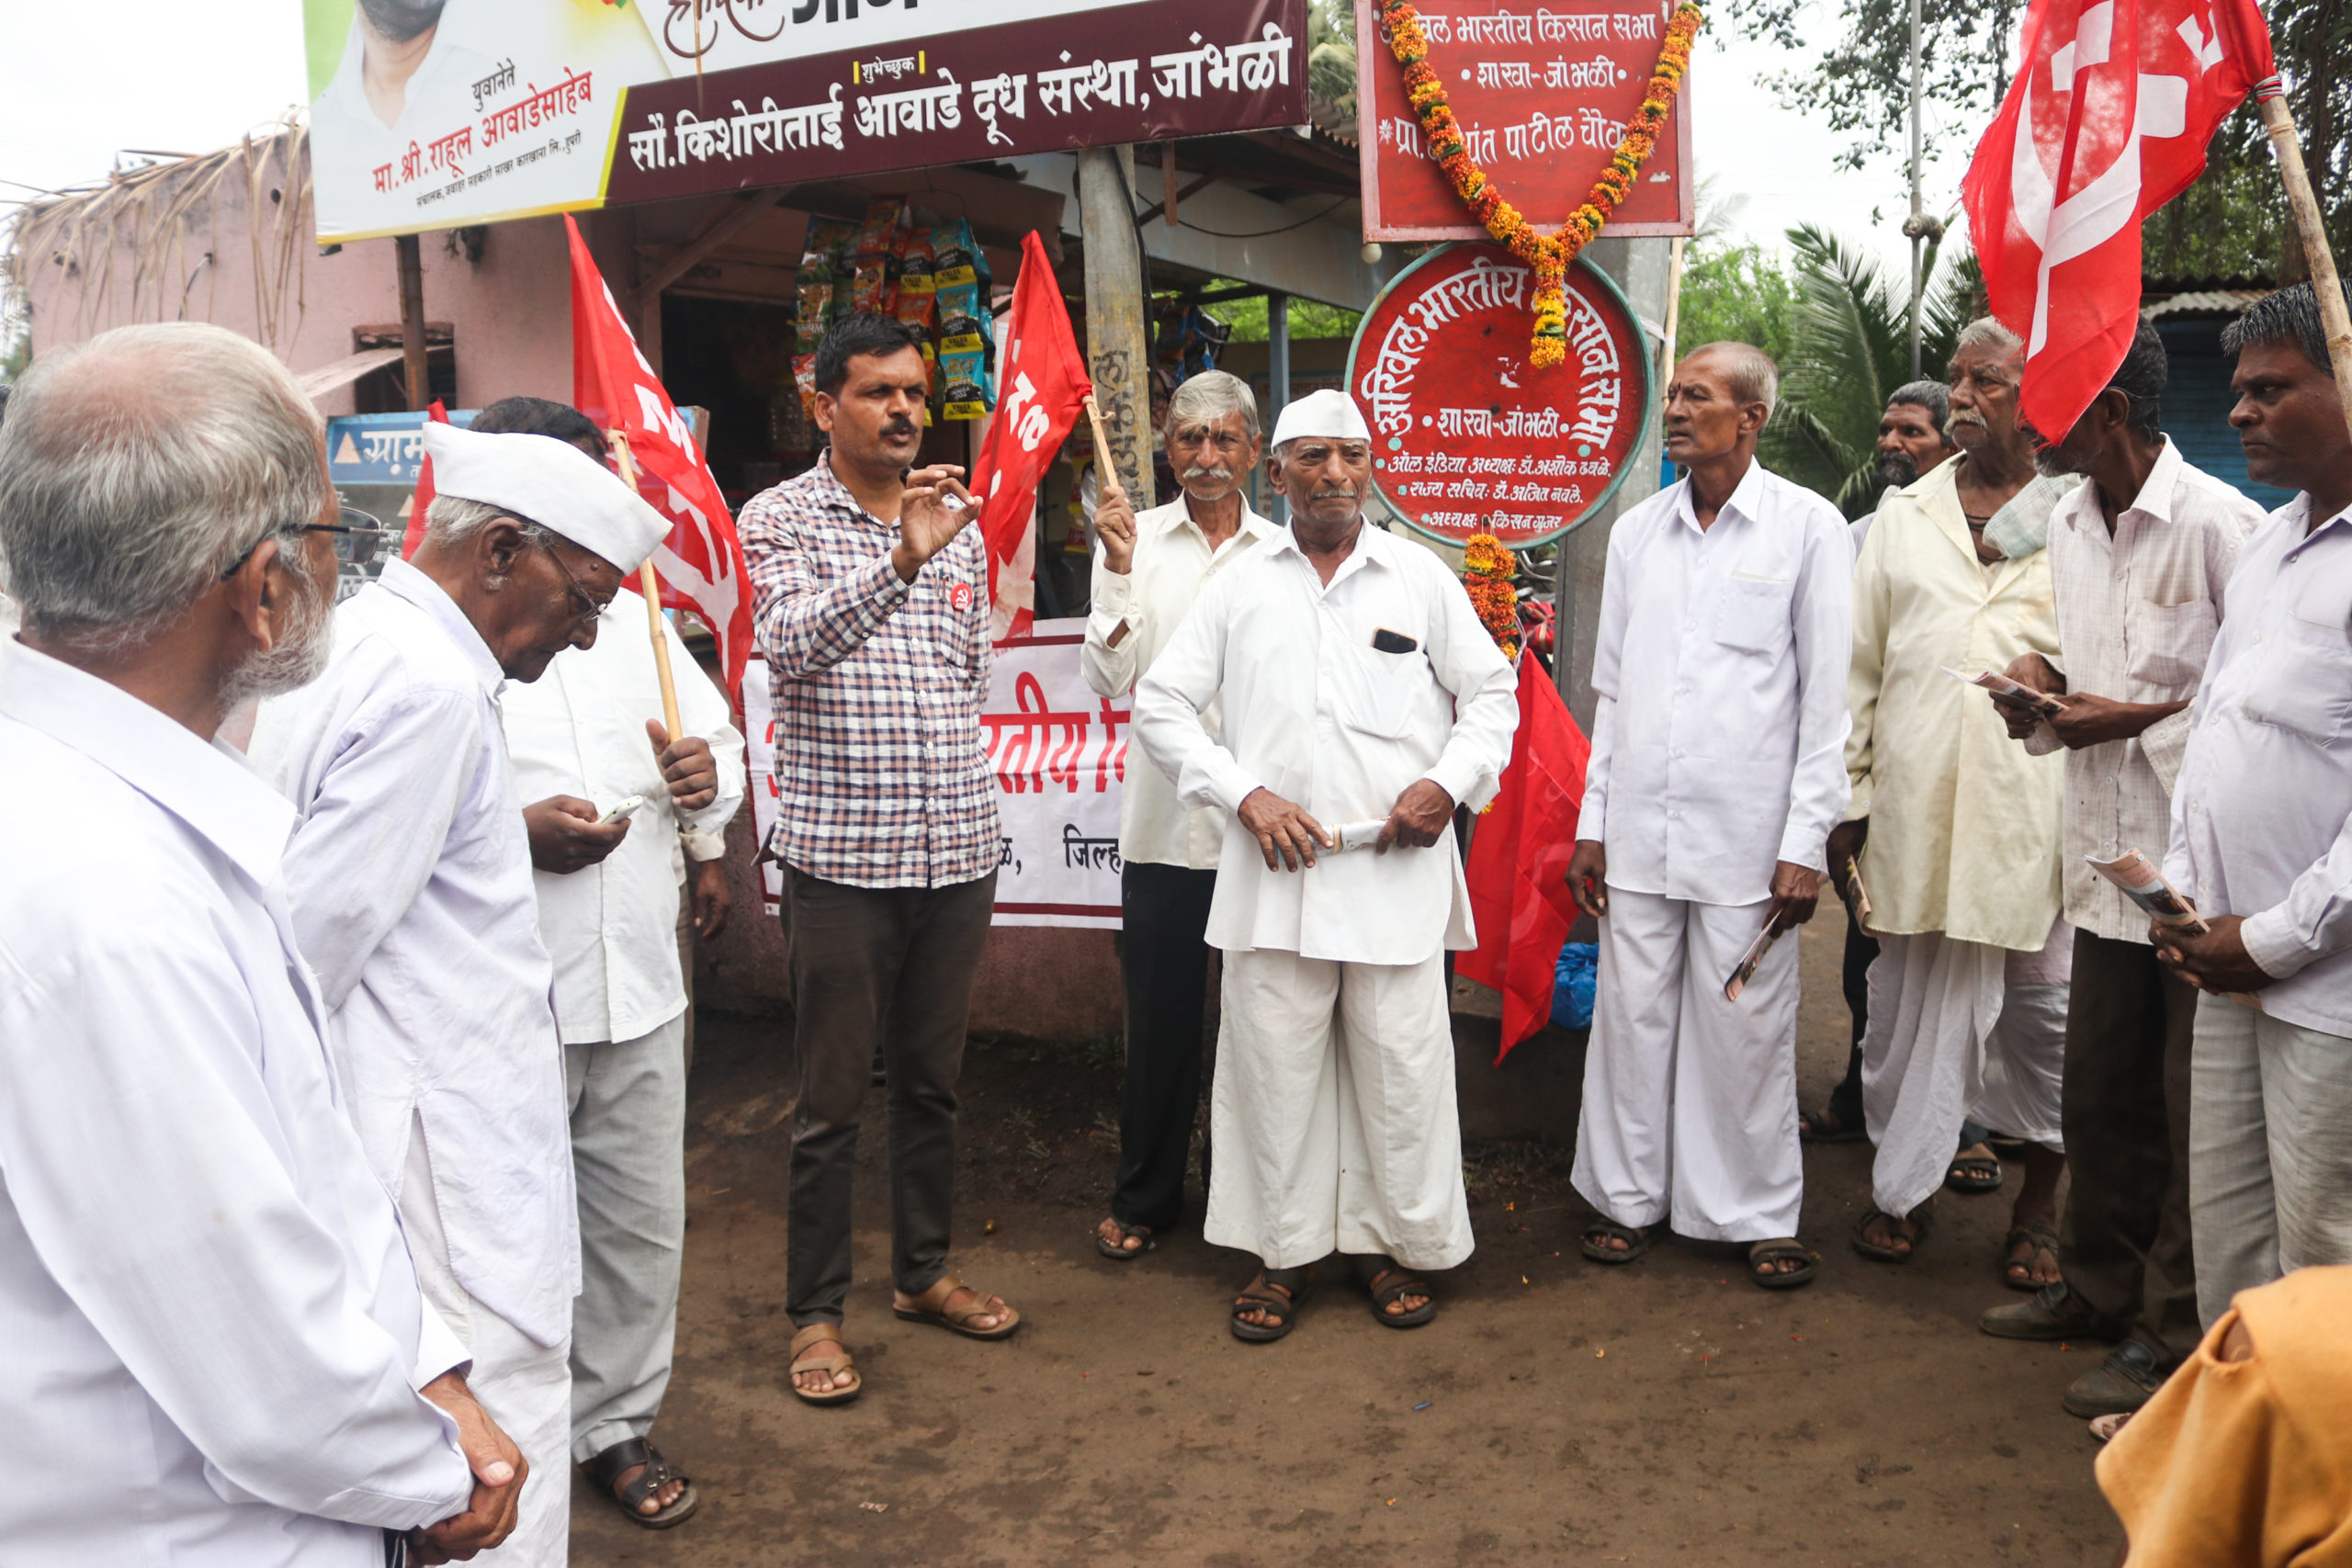 Lawyer Amol Naik (brown shirt) has been unionizing daily wage laborers and farmers in India's Maharashtra state to press for better policies that protect workers / credit: Sanket Jain